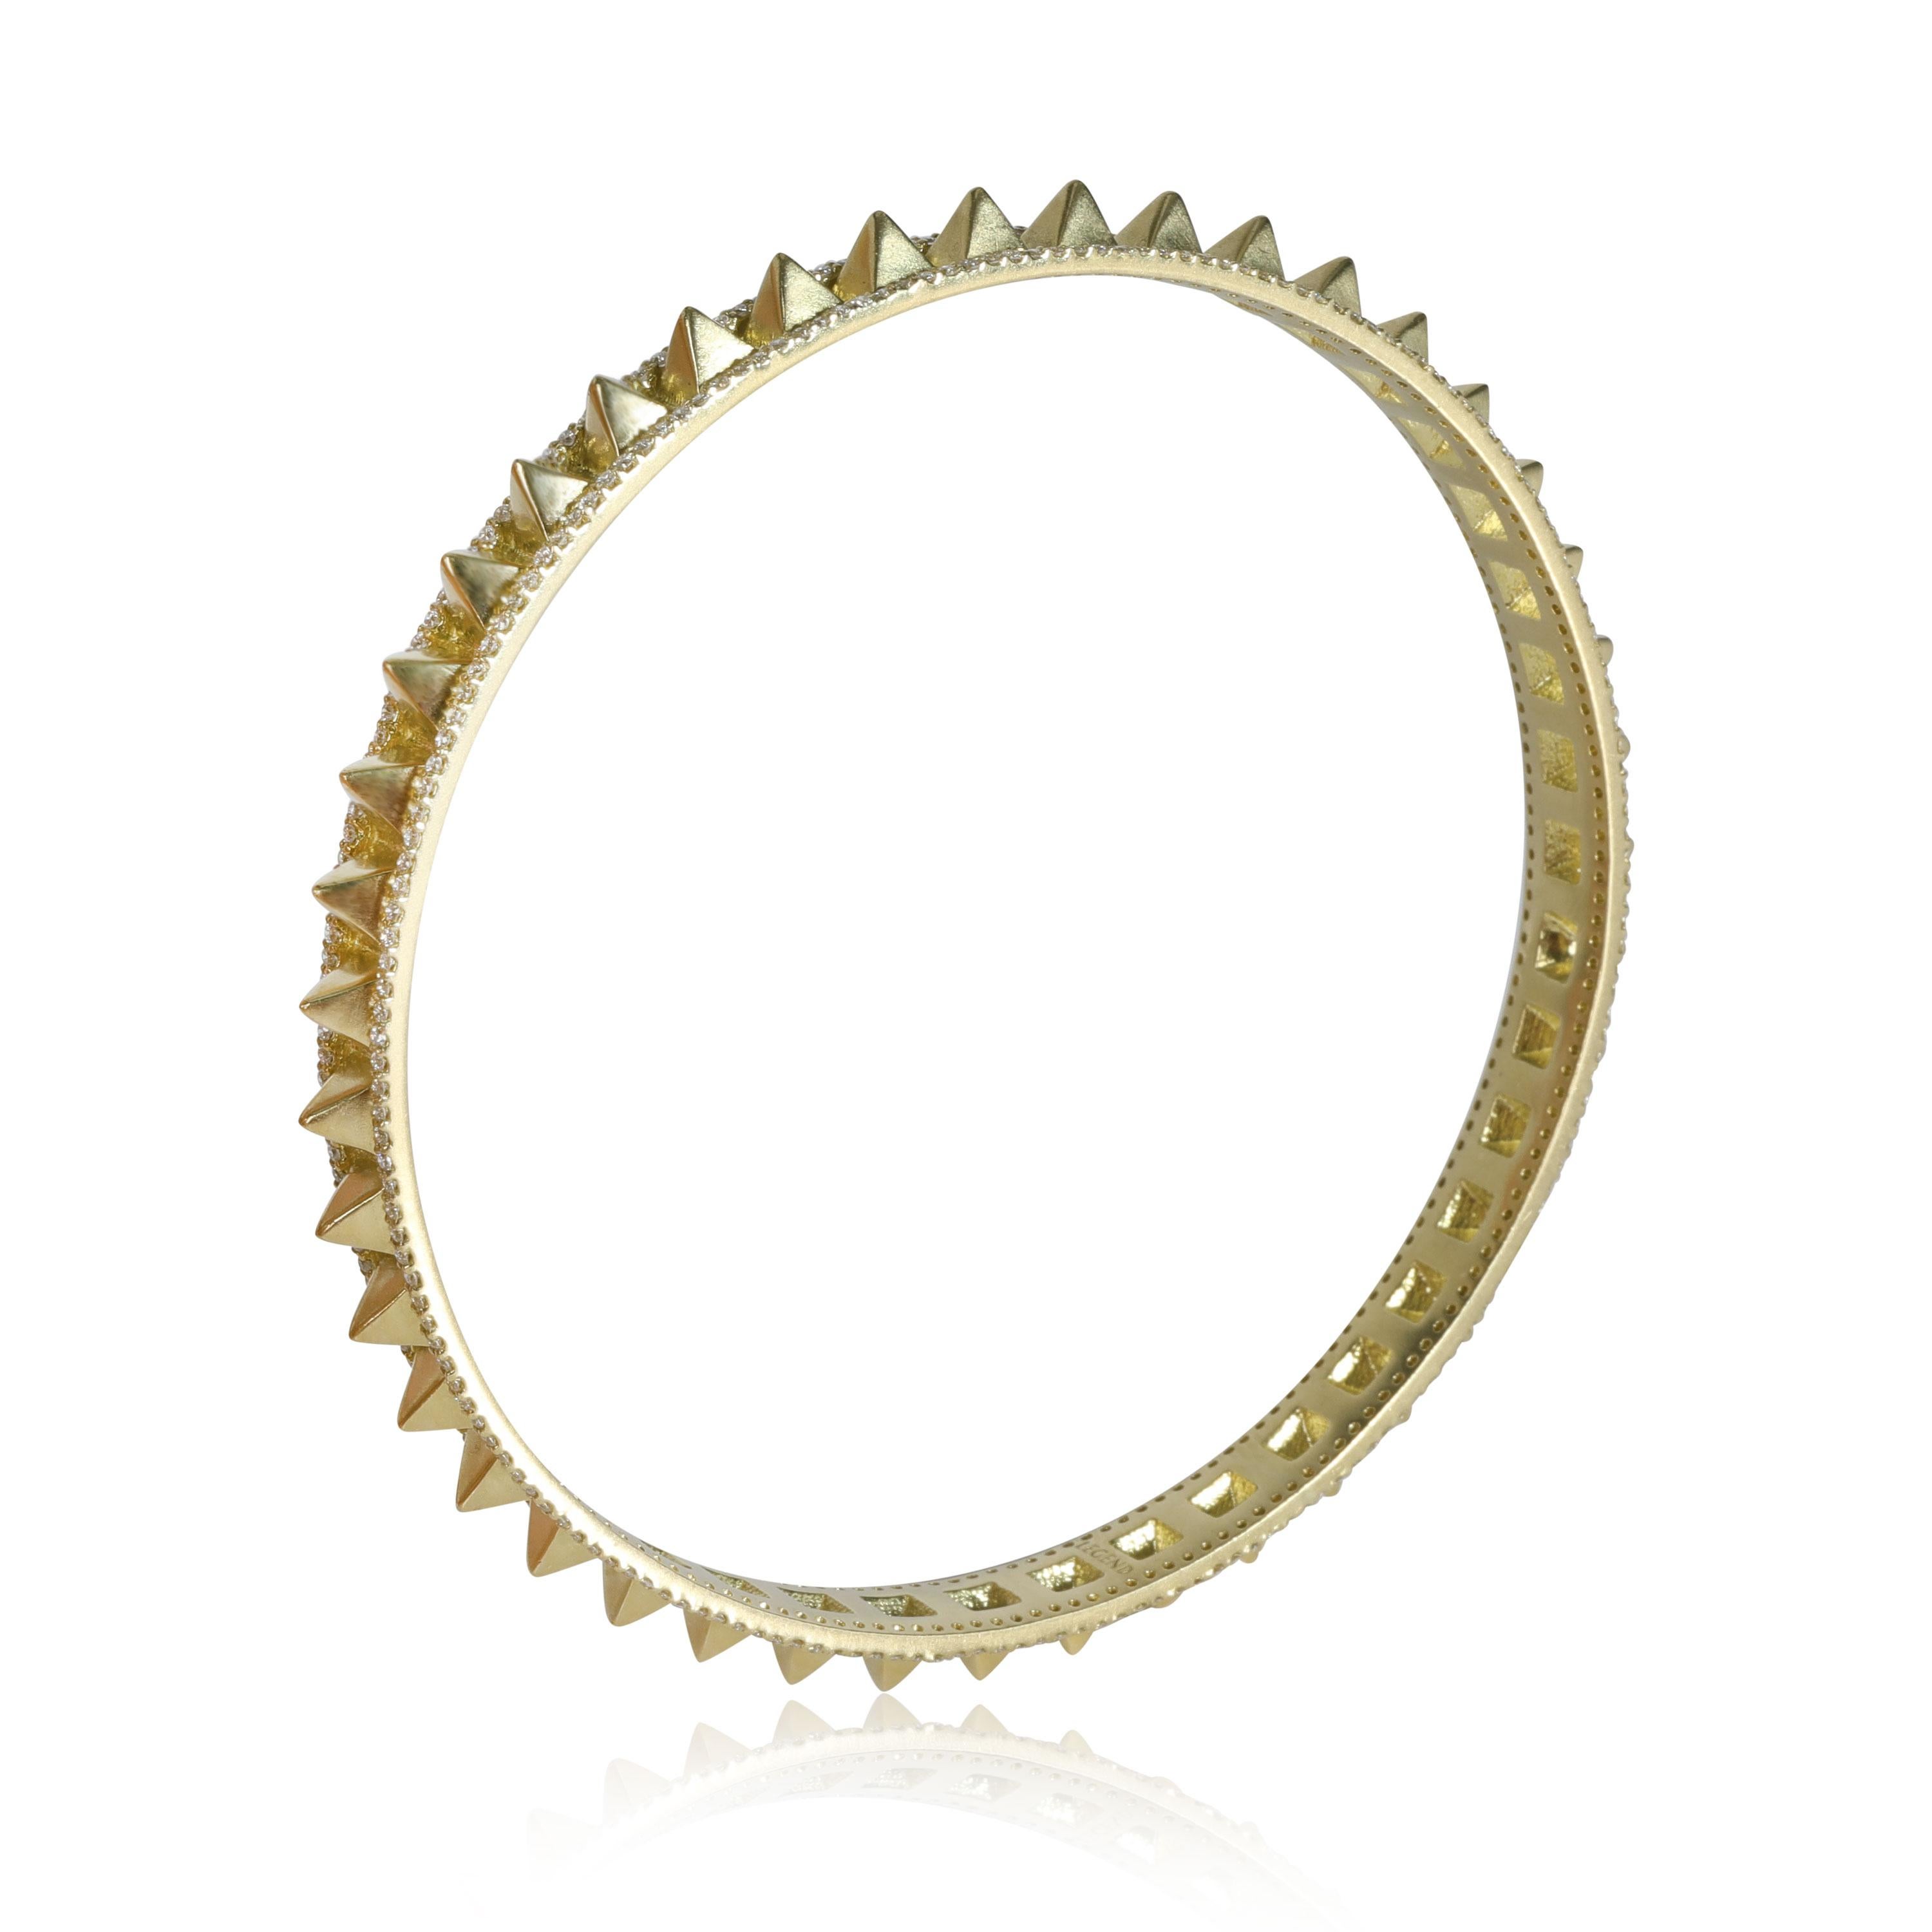 Diamonds Surya Spiked Bangle in 18K Yellow Gold (2.59 ctw)

PRIMARY DETAILS
SKU: 113324
Listing Title: Diamonds Surya Spiked Bangle in 18K Yellow Gold (2.59 ctw)
Condition Description: Retails for 16,995 USD. New and unworn. Inside diameter 2.5